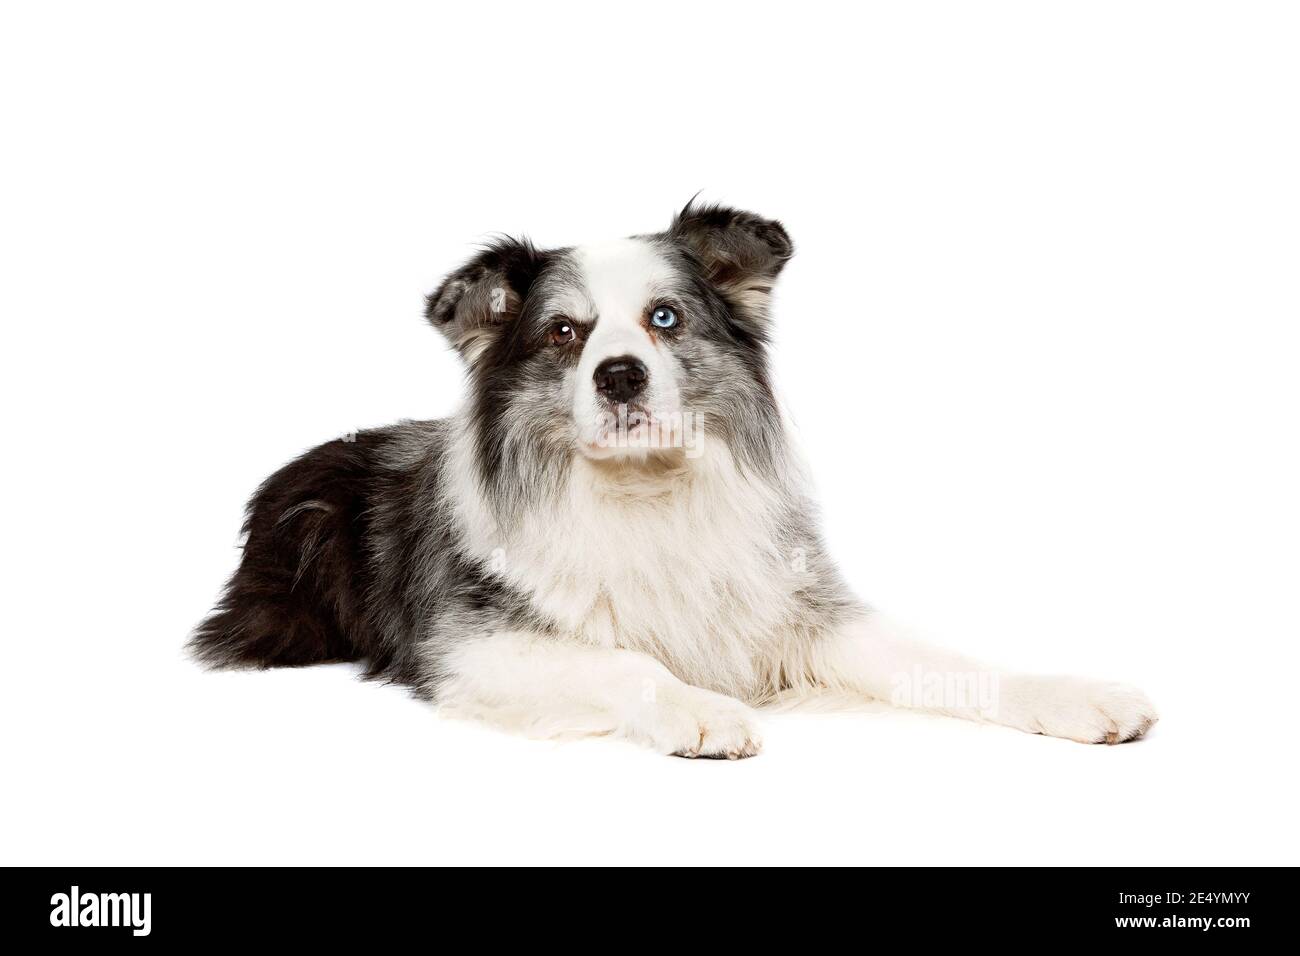 old blue merle border collie dog in front of a white background Stock Photo